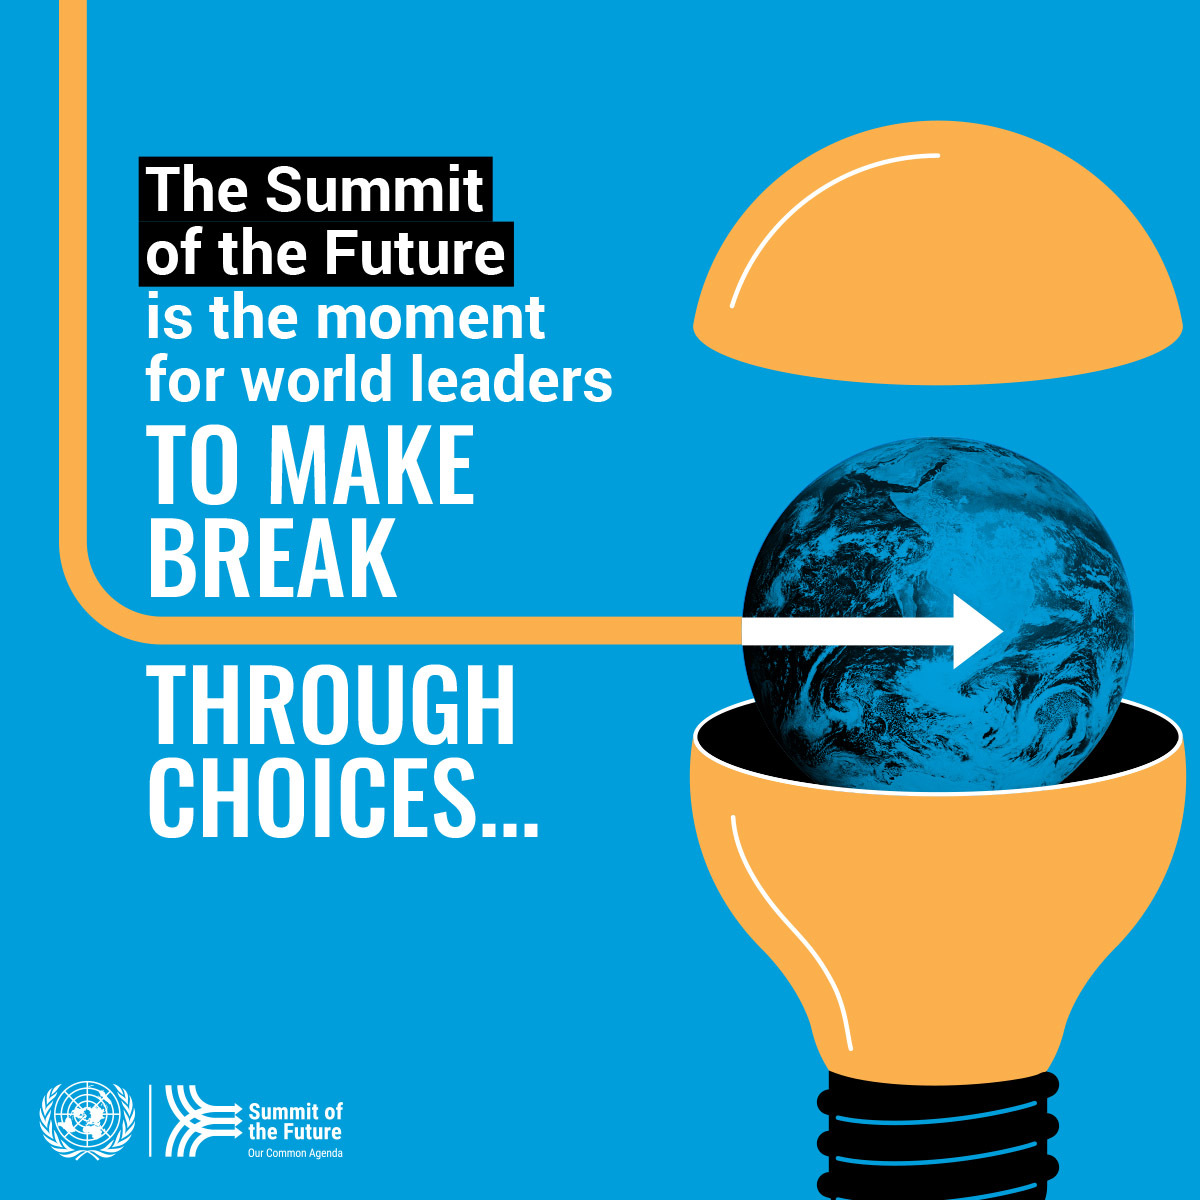 🌎The world must come together as one to meet the needs of the present while also preparing for the challenges ahead. 📅This September’s Summit of the Future is the moment to build solidarity and forge new paths ahead for #OurCommonFuture: bit.ly/49xtDzu @UN #SDGs